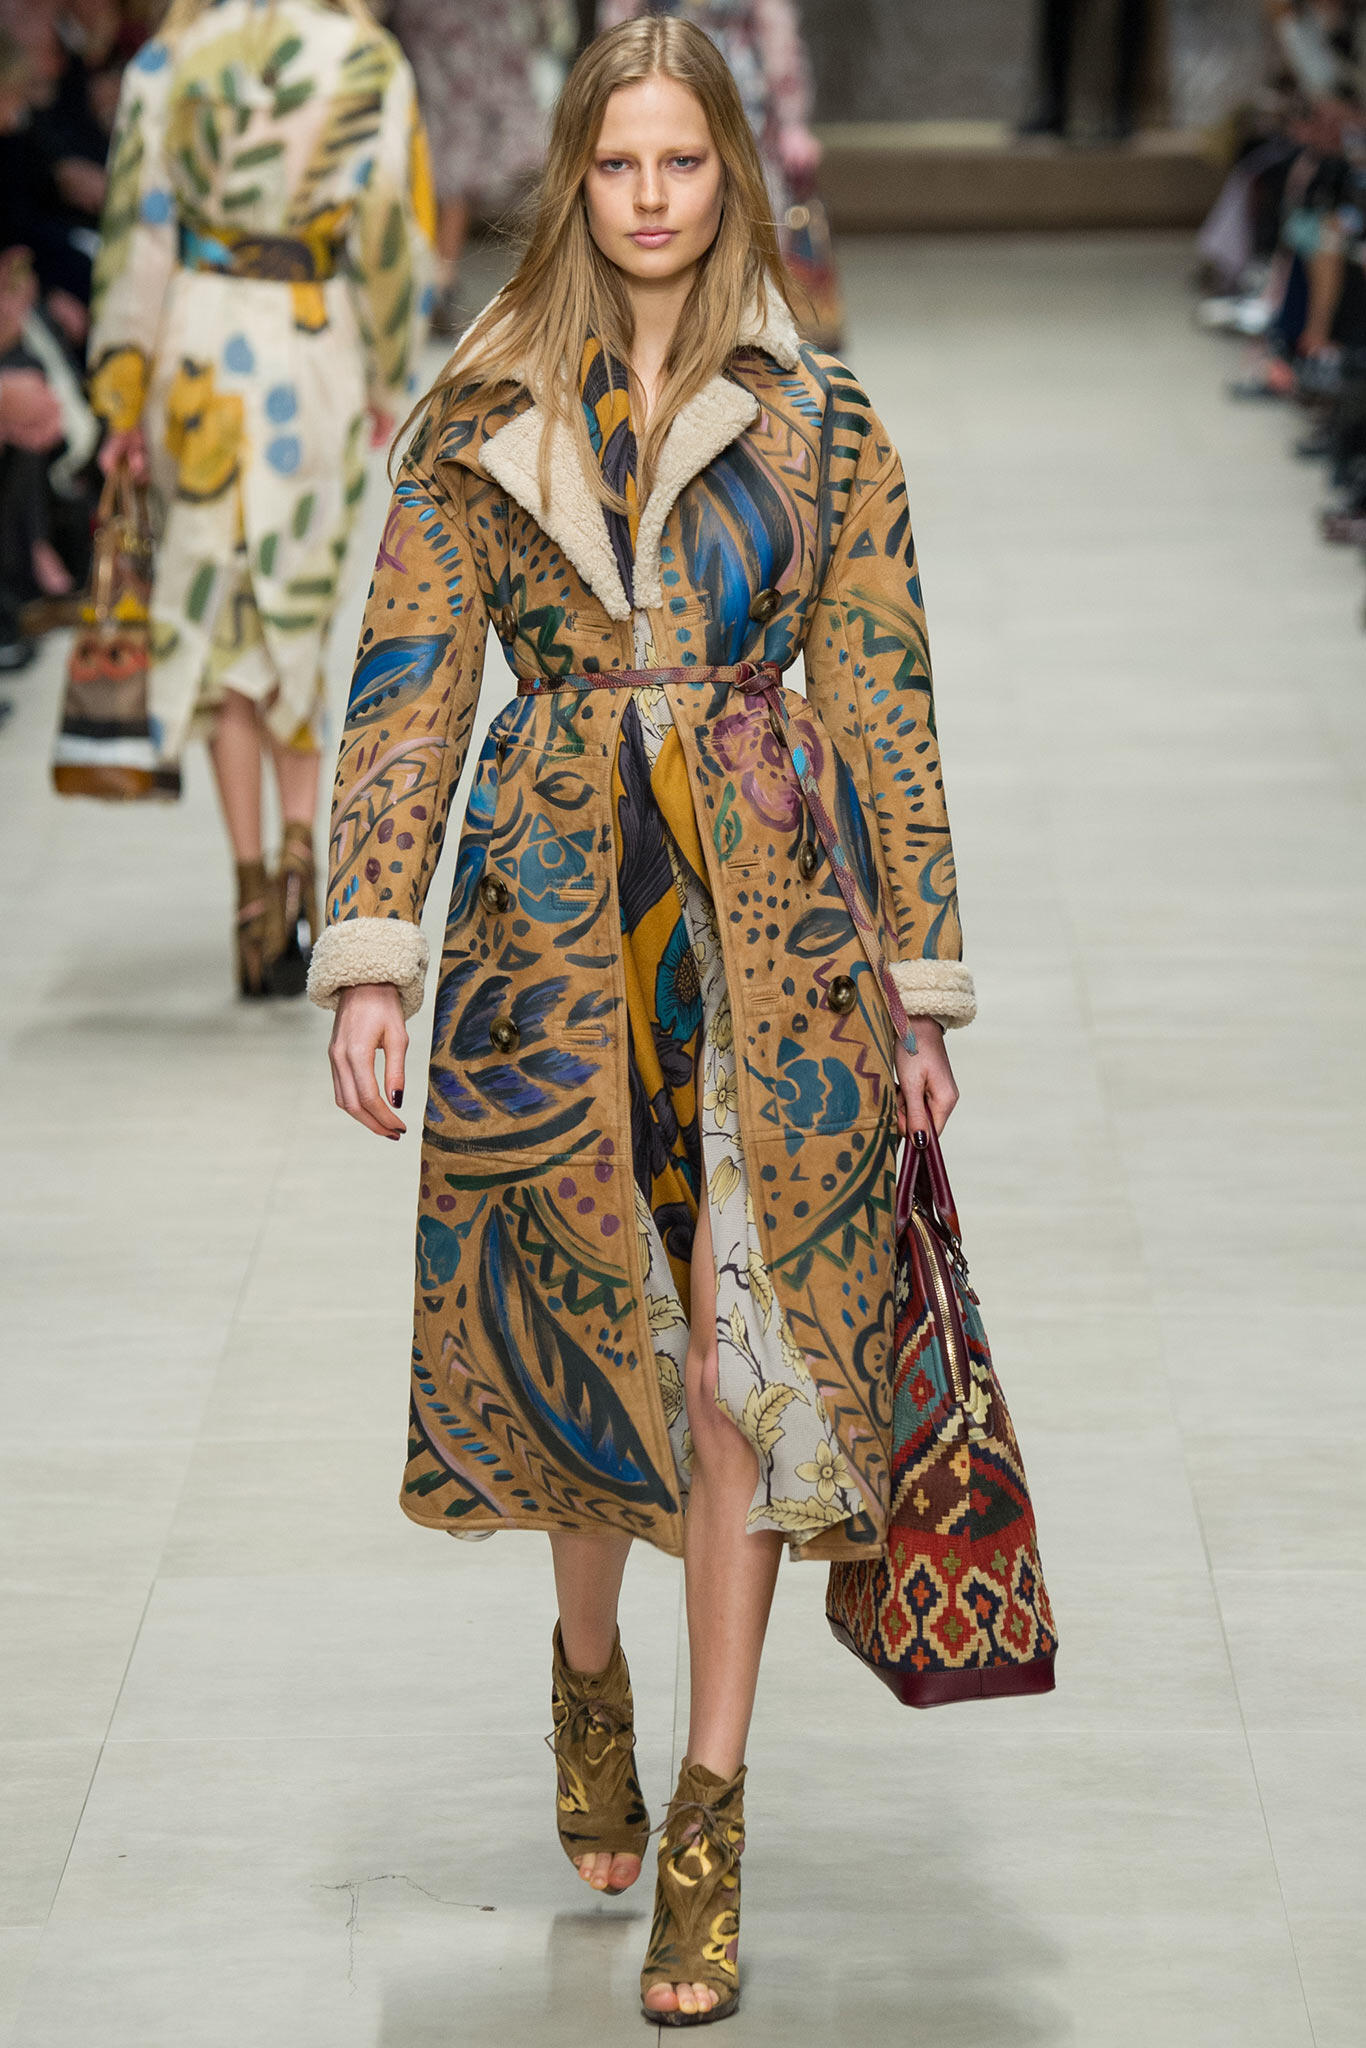 Burberry was inspired by hippie fashion.